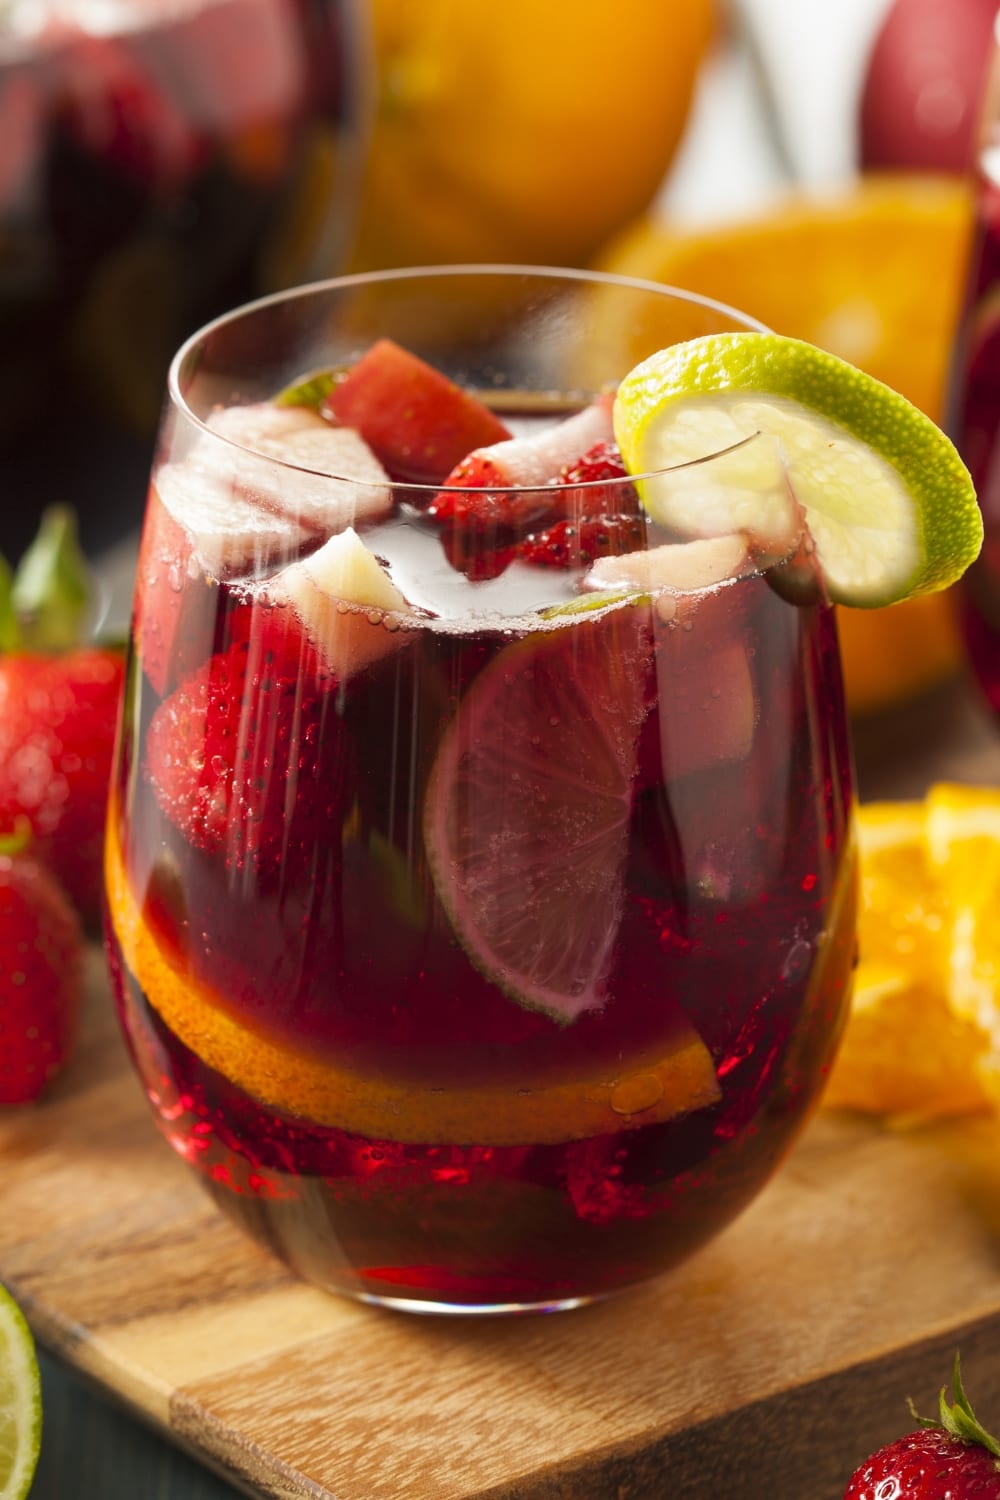 Boozy Homemade Apple Sangria with Strawberries, Apples, and Orange